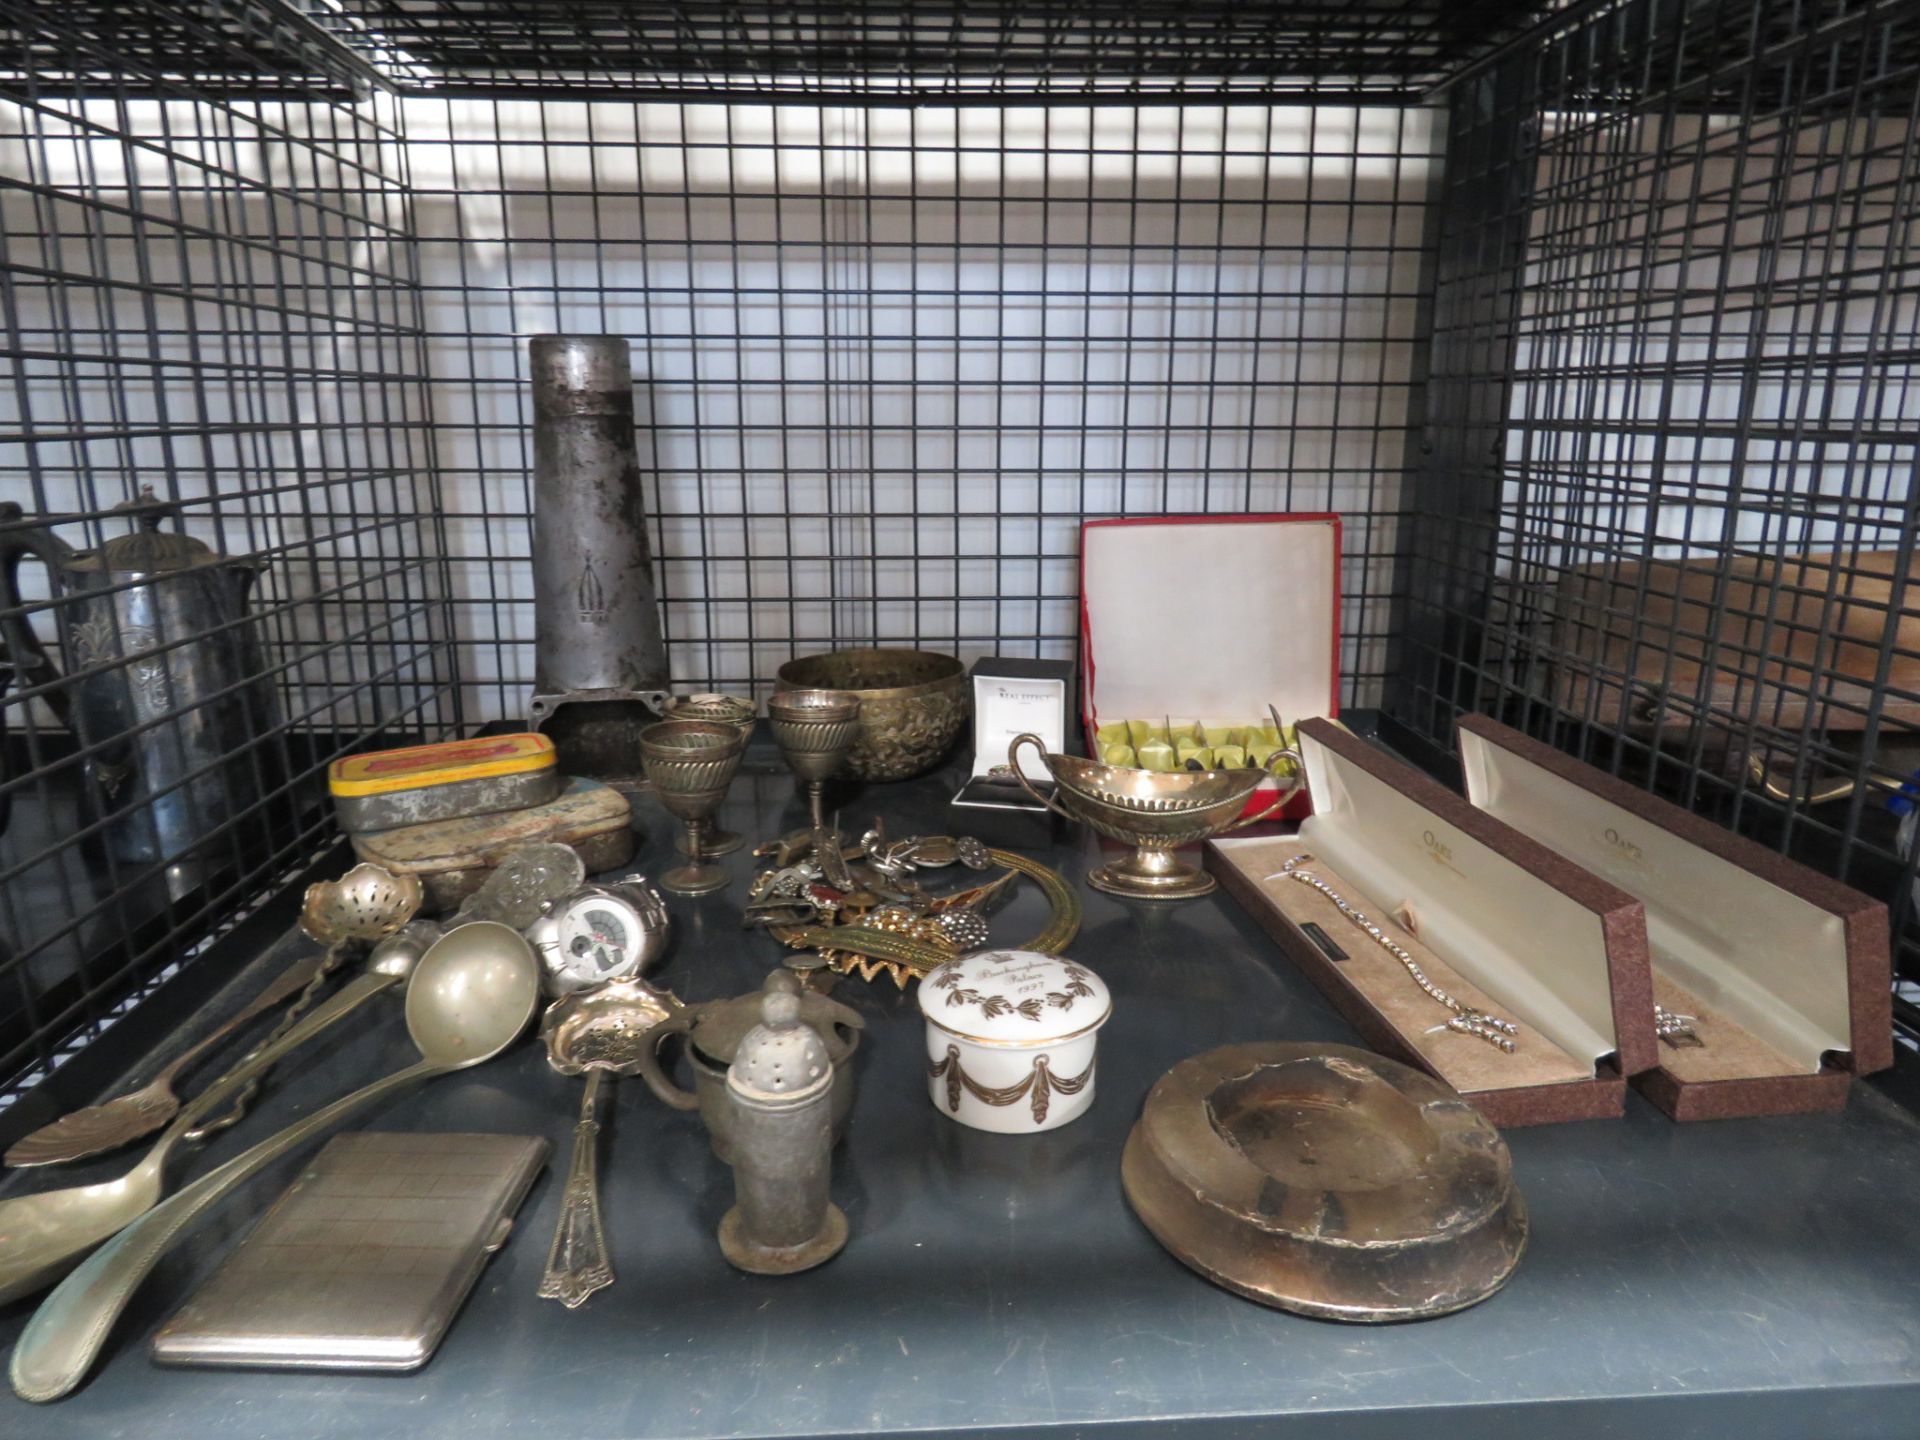 Cage containing a boxed teaspoon set, dress jewellery, loose cutlery, bracelets, egg cups and